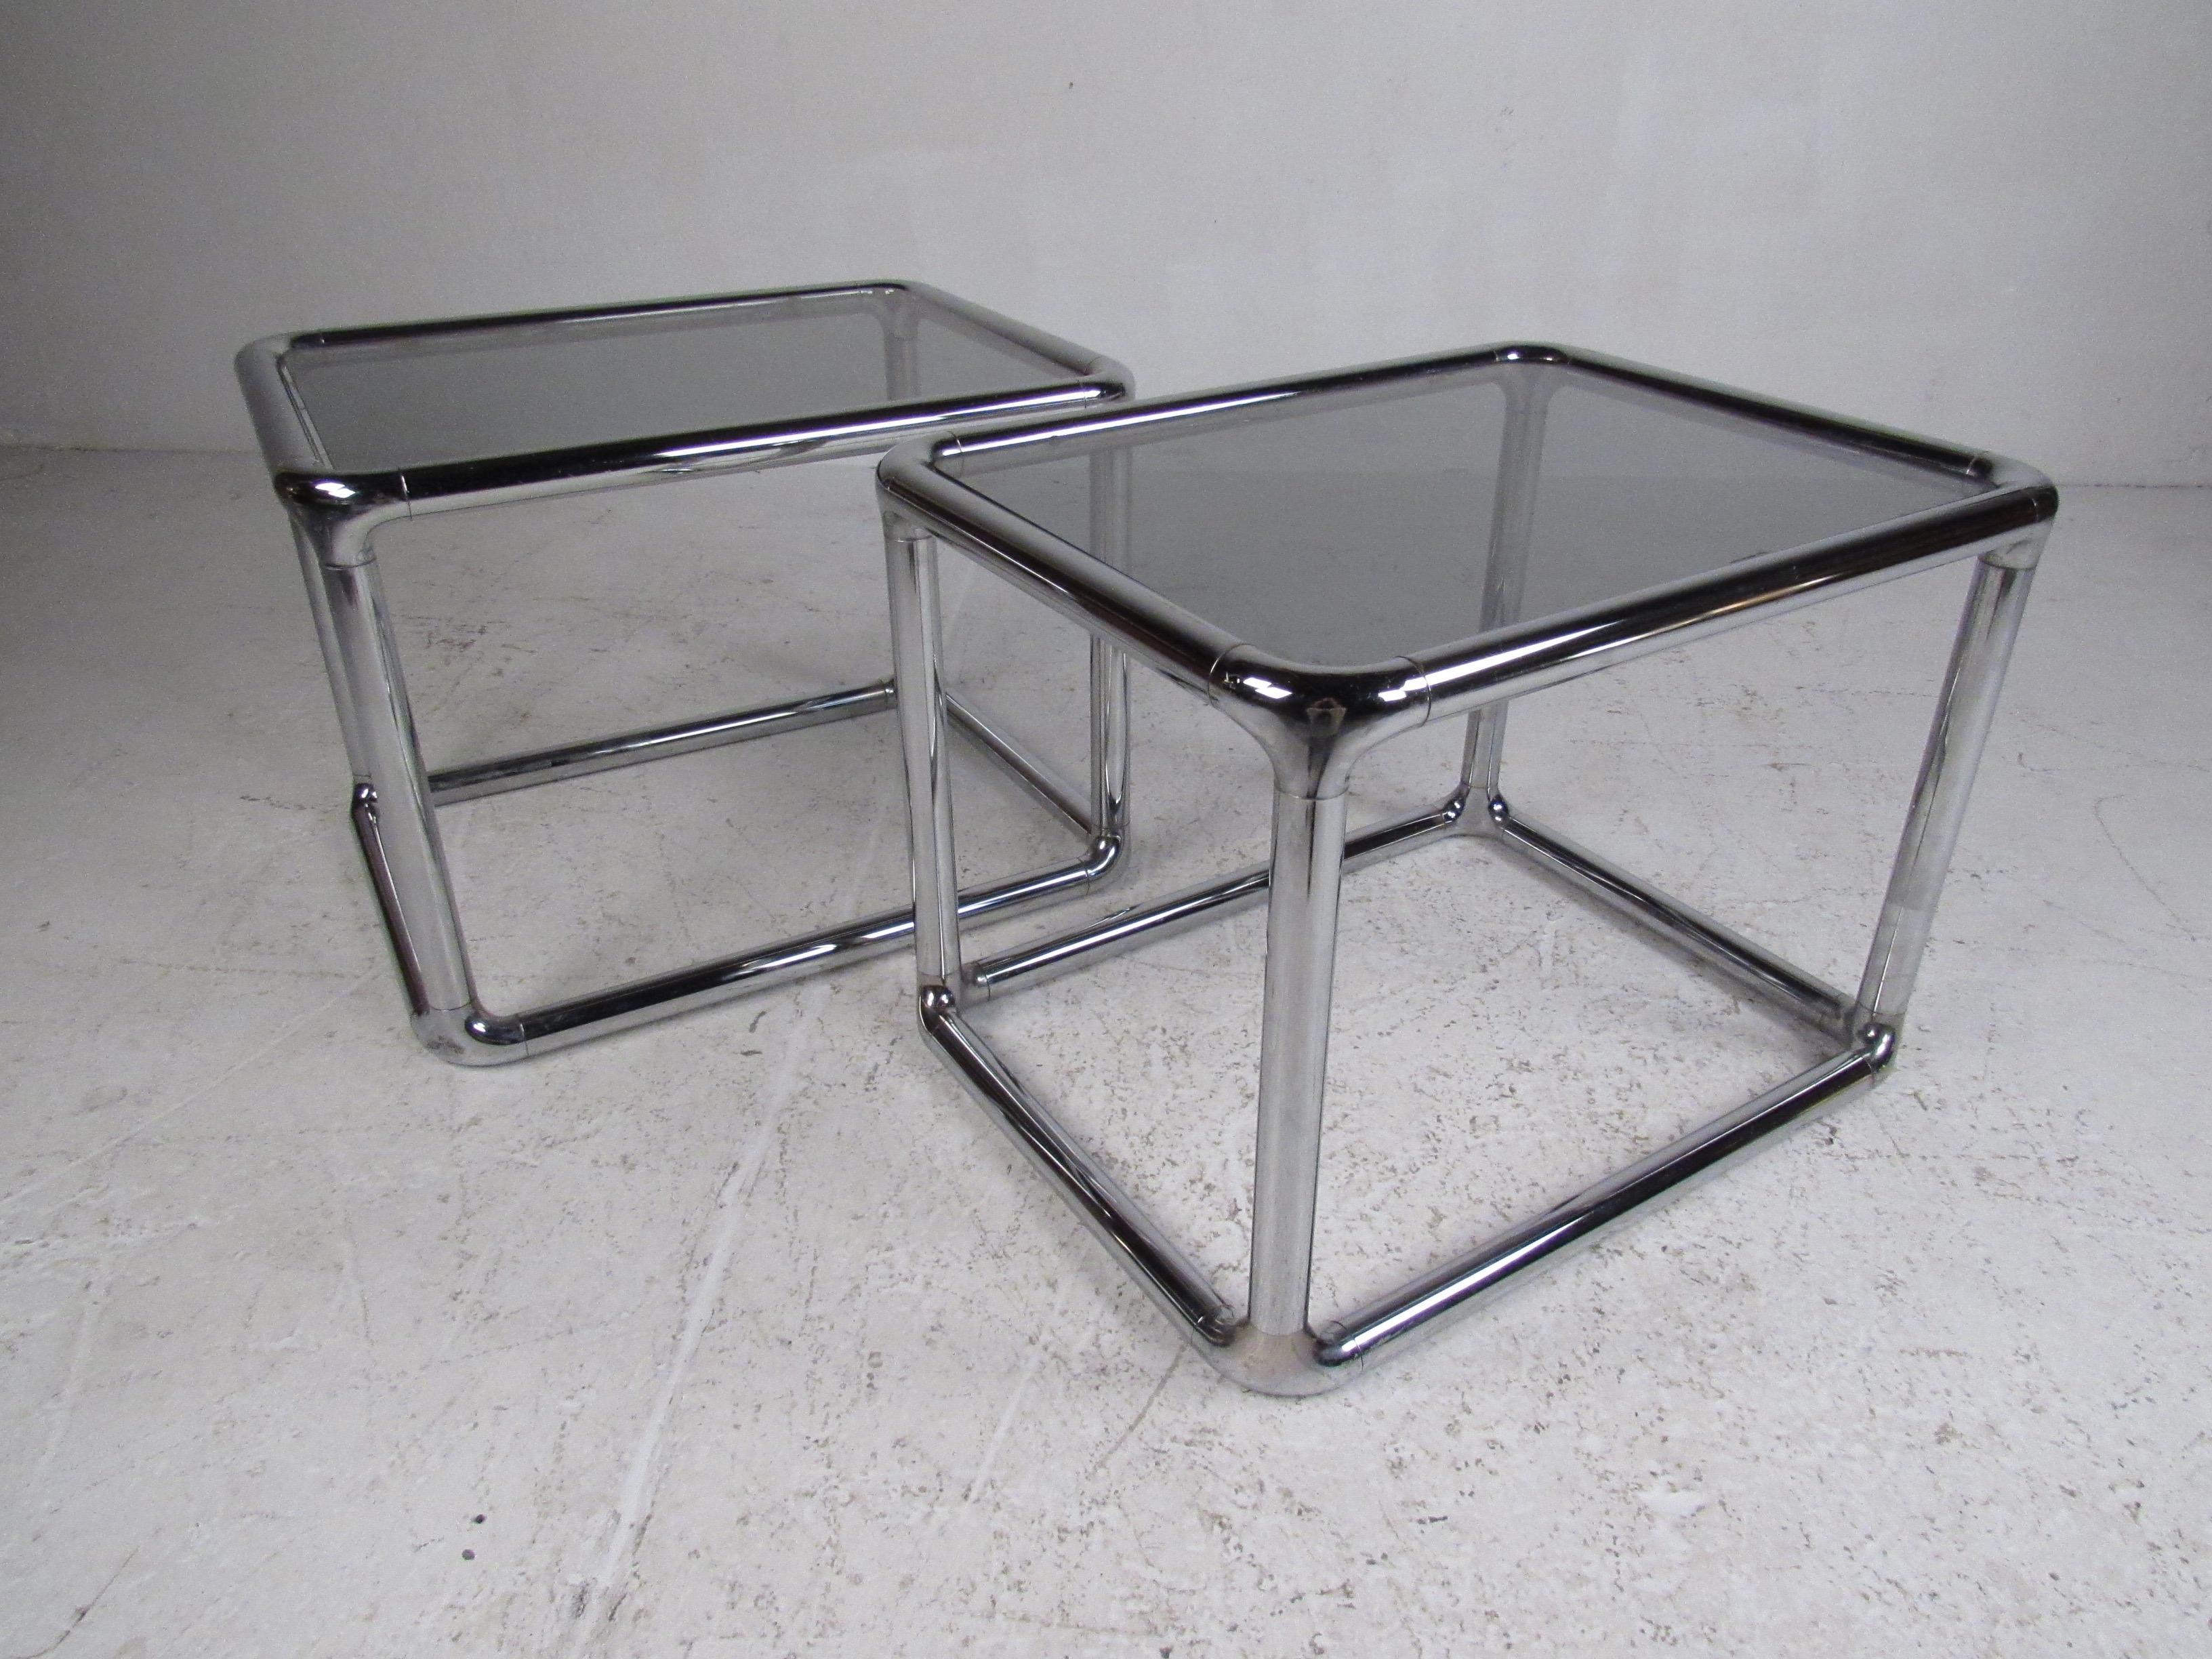 This beautiful pair of vintage modern end tables feature a unique chrome rod frame. Sleek and sturdy design with a gray tinted-glass tabletop. This unusual mid-century pair makes the perfect addition to any modern interior. Please confirm item